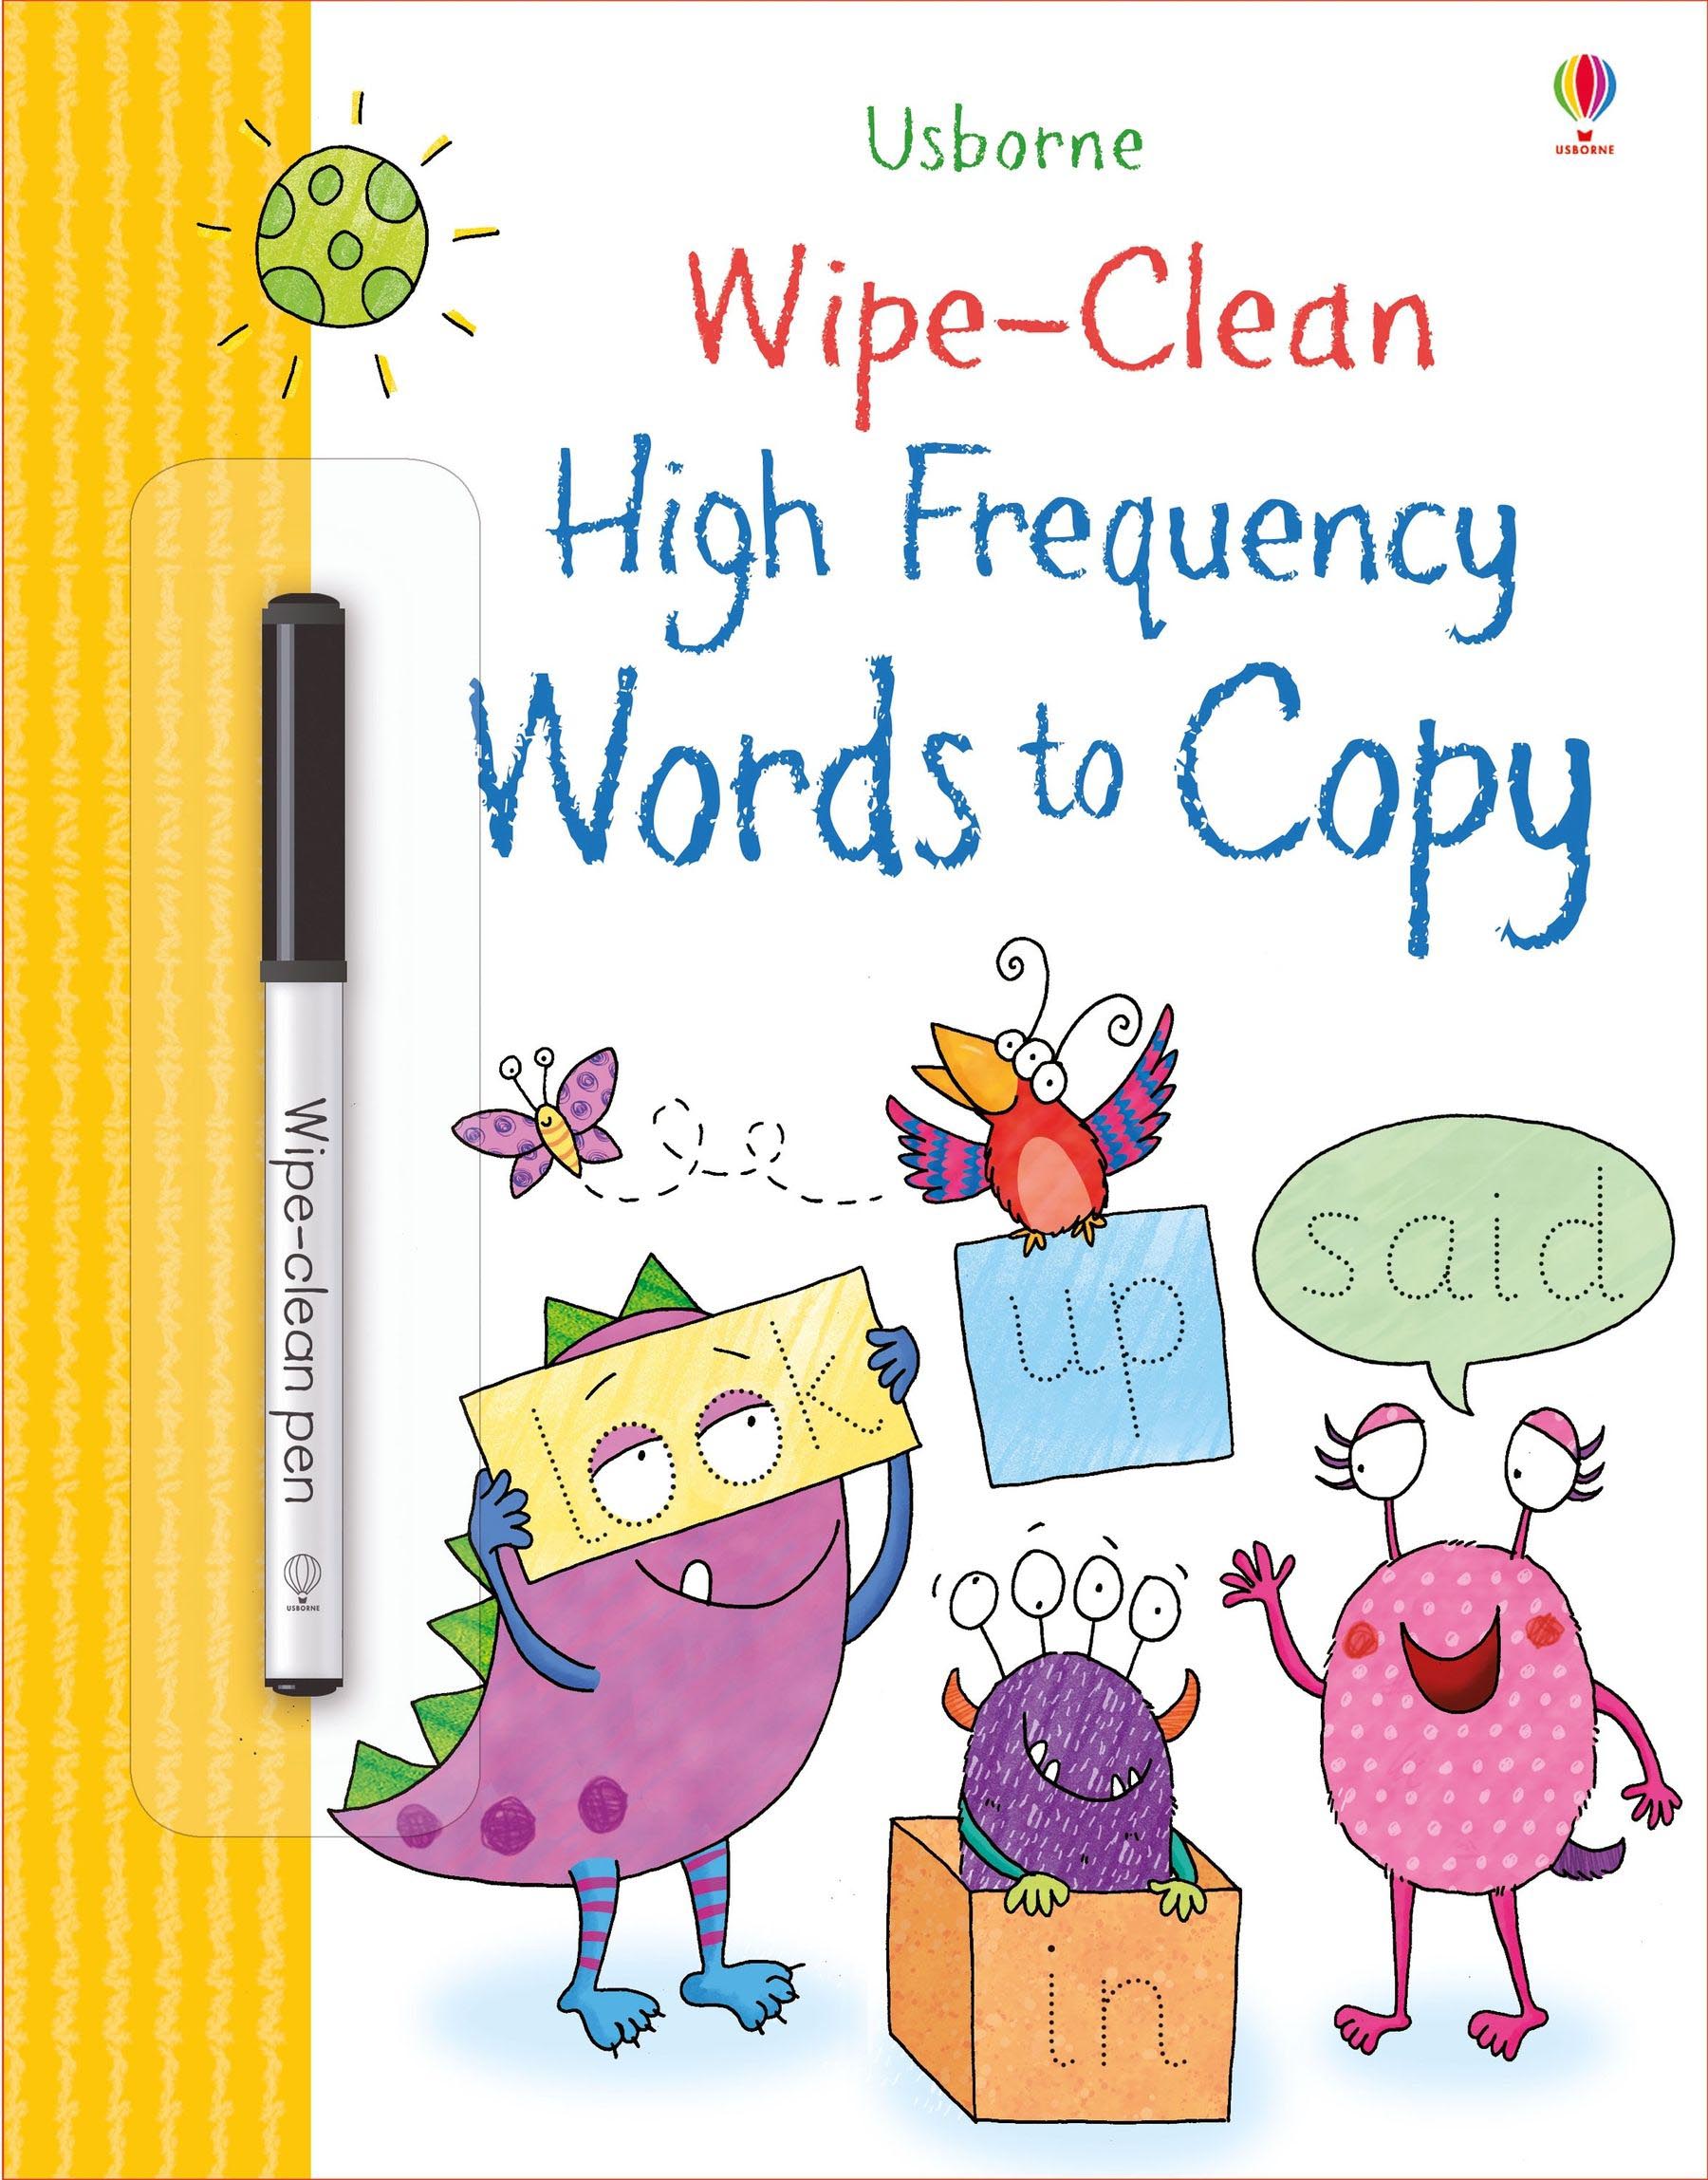 Usborne Wipe Clean High Frequency Words to Copy